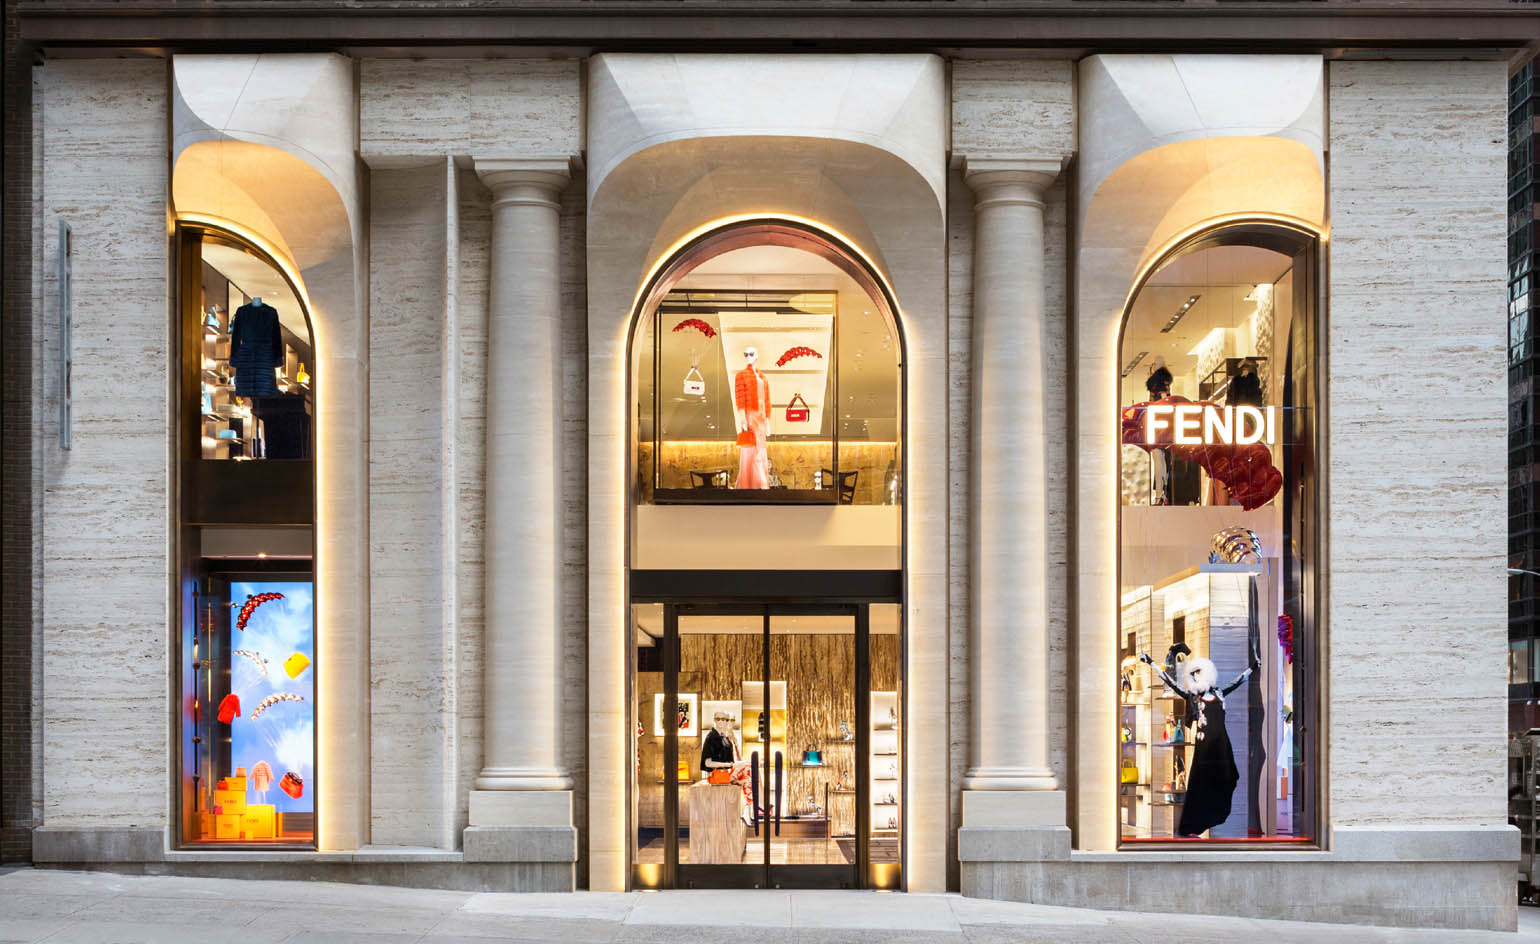 FENDI Brings Italy to New York with Rome-Inspired Flagship